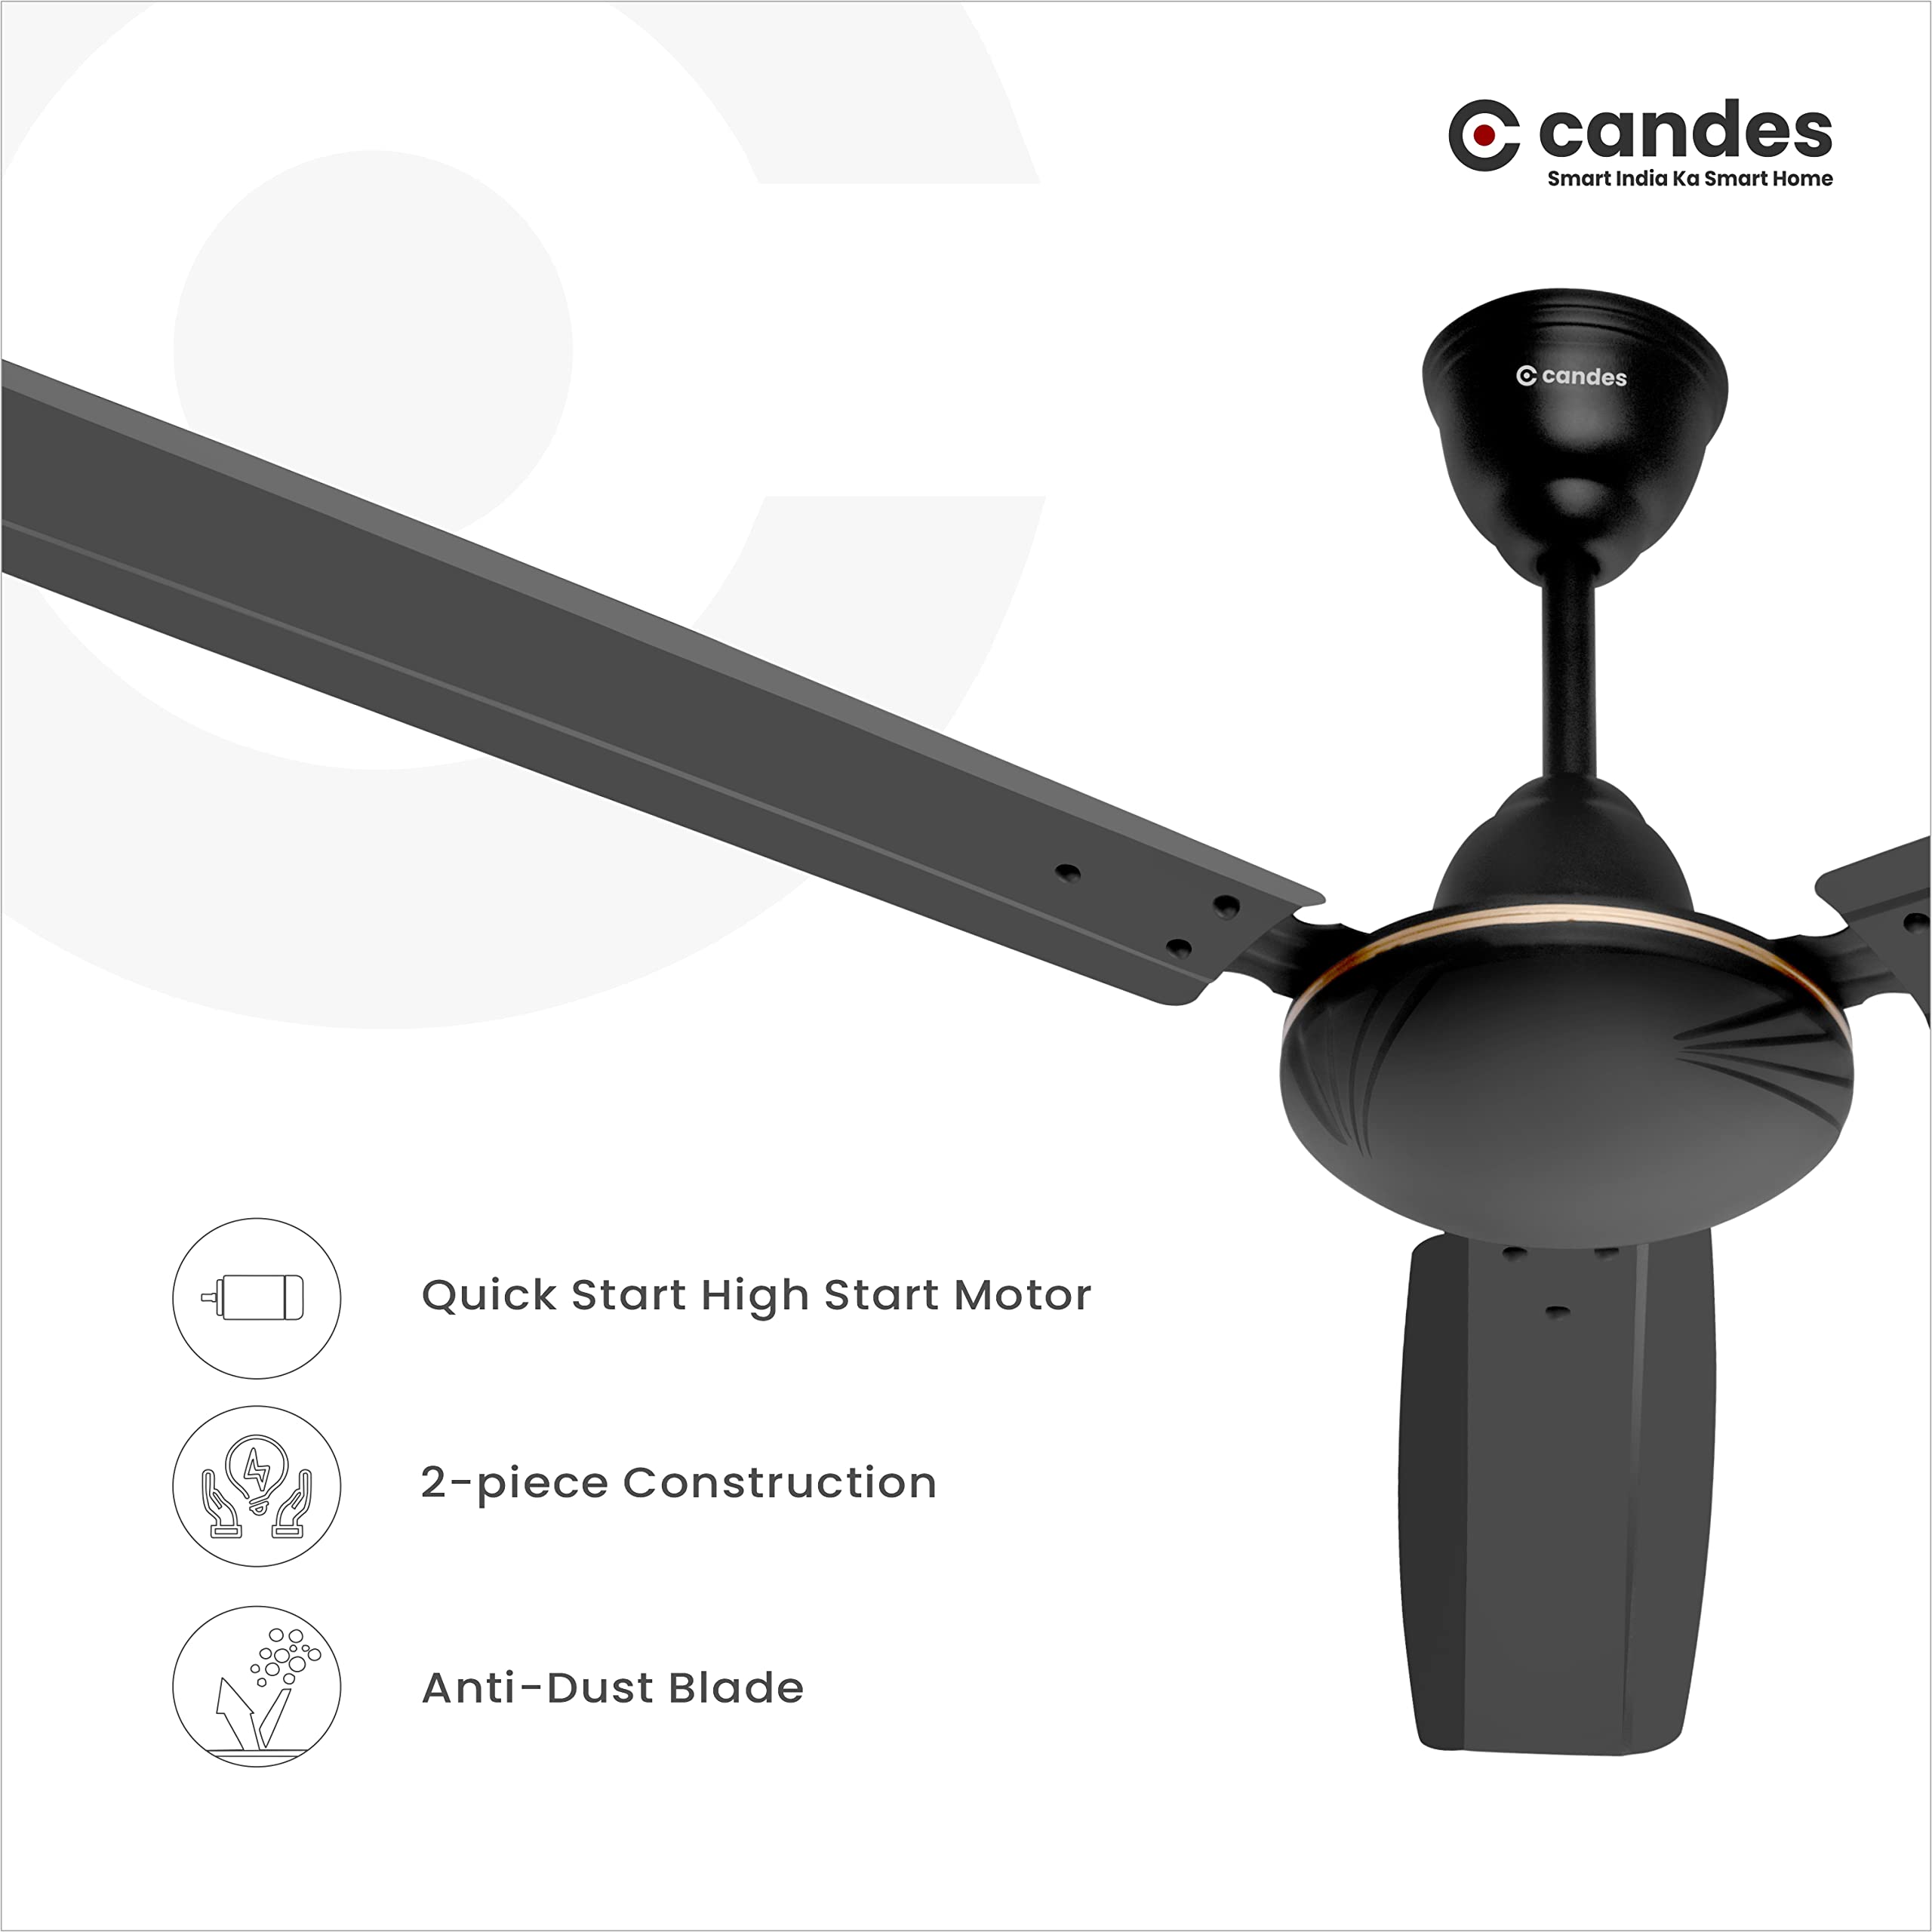 Candes Swift 1200mm /48 inch High Speed Anti-dust Decorative 5 Star Rated Ceiling Fan 400 RPM with 2 Yrs Warranty (Pack of 2, Brown)